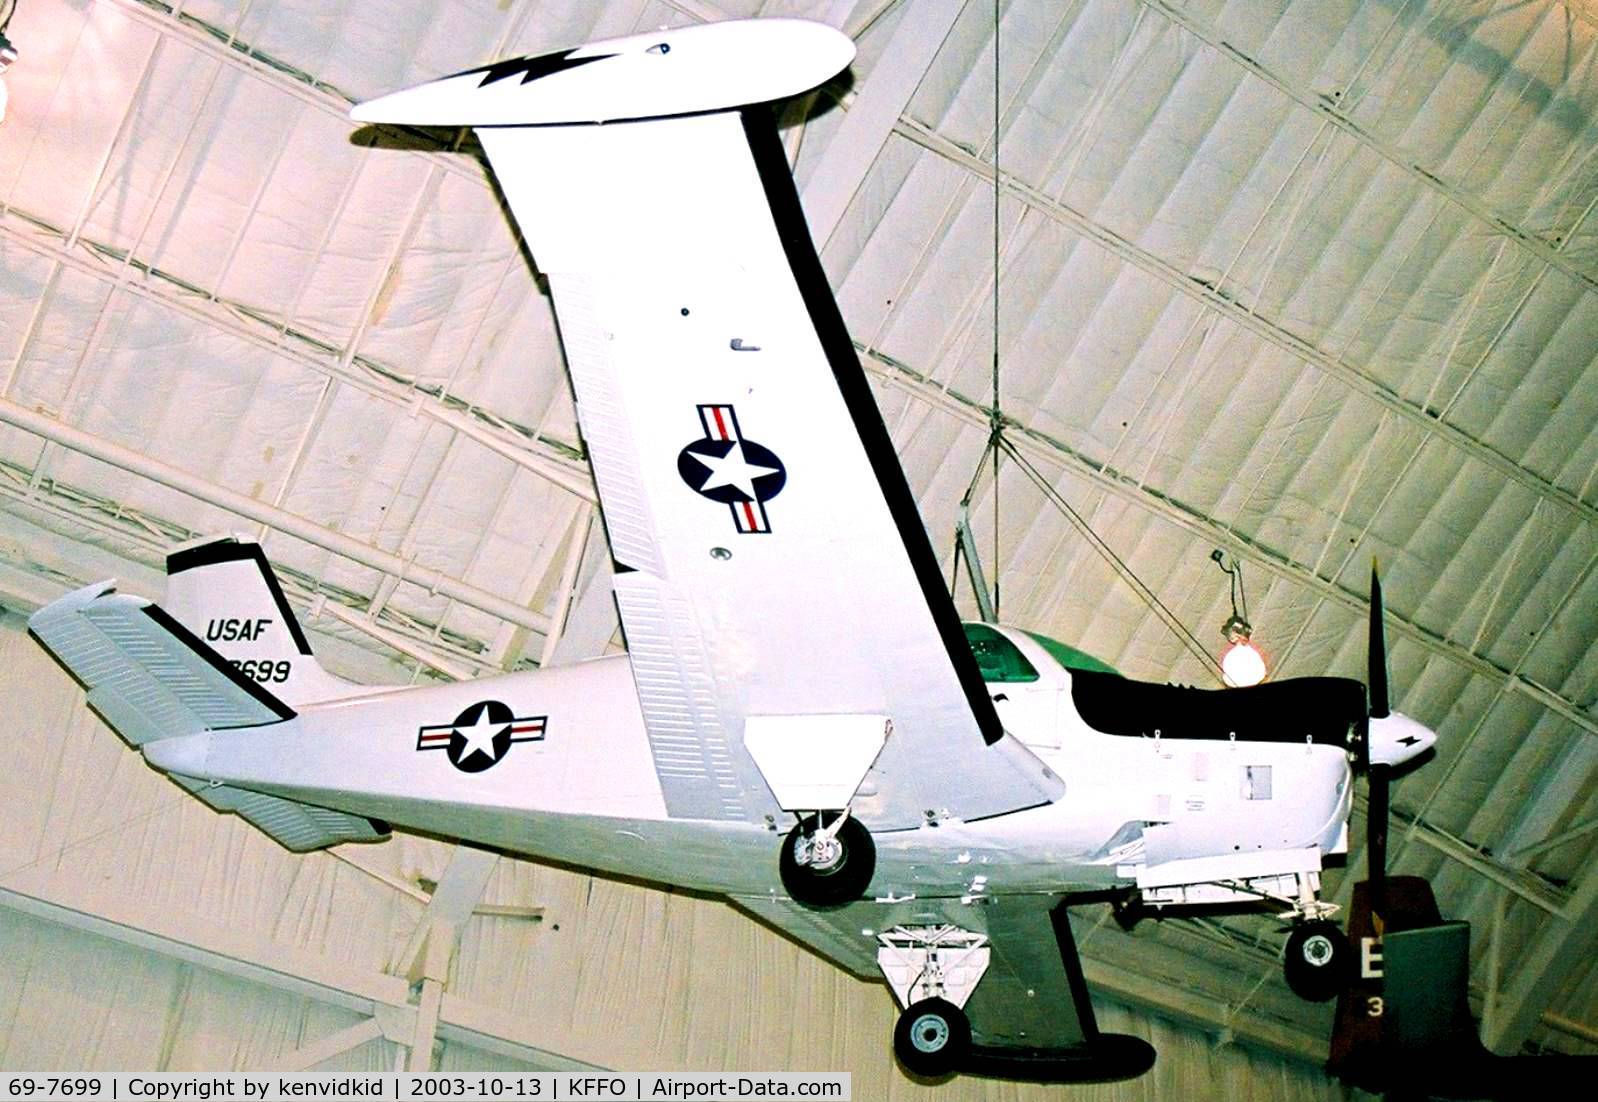 69-7699, 1969 Beech QU-22B C/N EB-7, At The Museum of the United States Air Force Dayton Ohio.